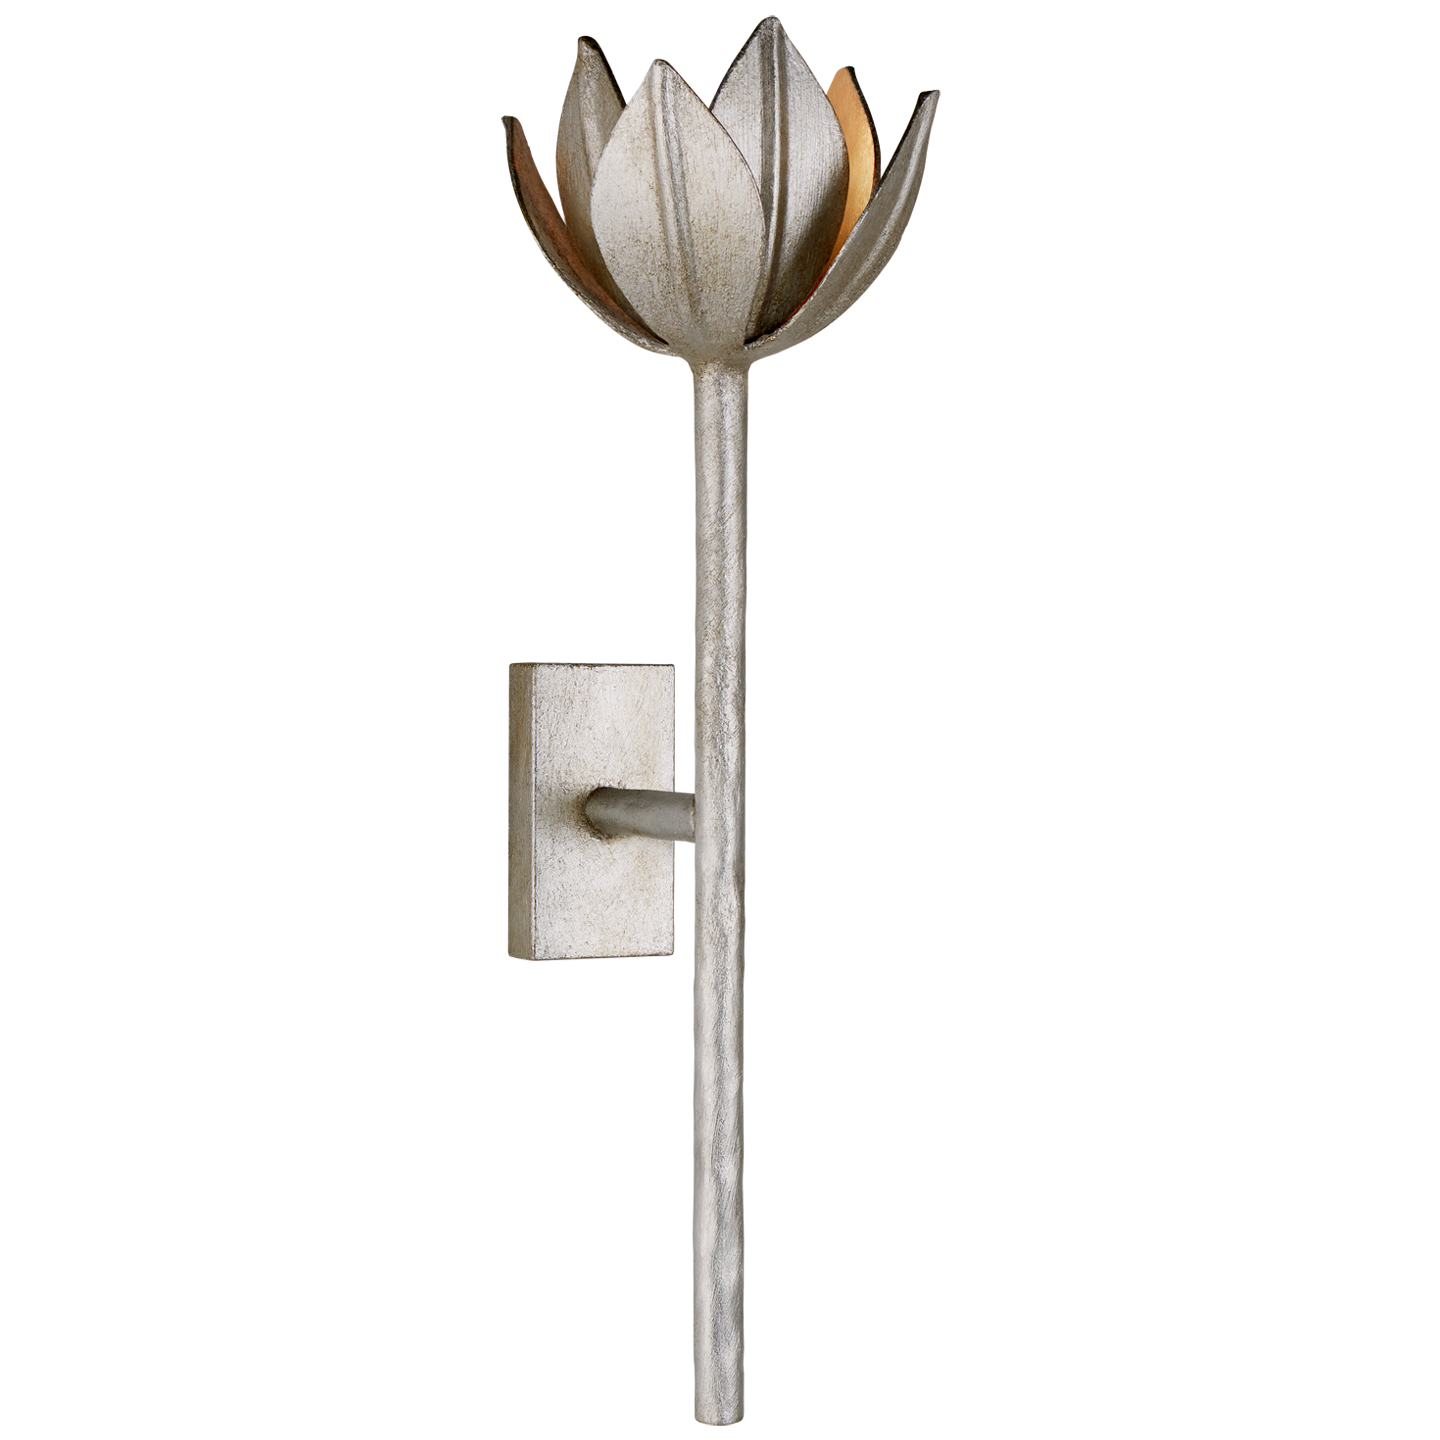 The Alberto Medium Sconce is yet another elegant, fun addition to the Alberto Family. We would love to see this in a bathroom, hallway, or other area needing some spunky light  Designer: Julie Neill